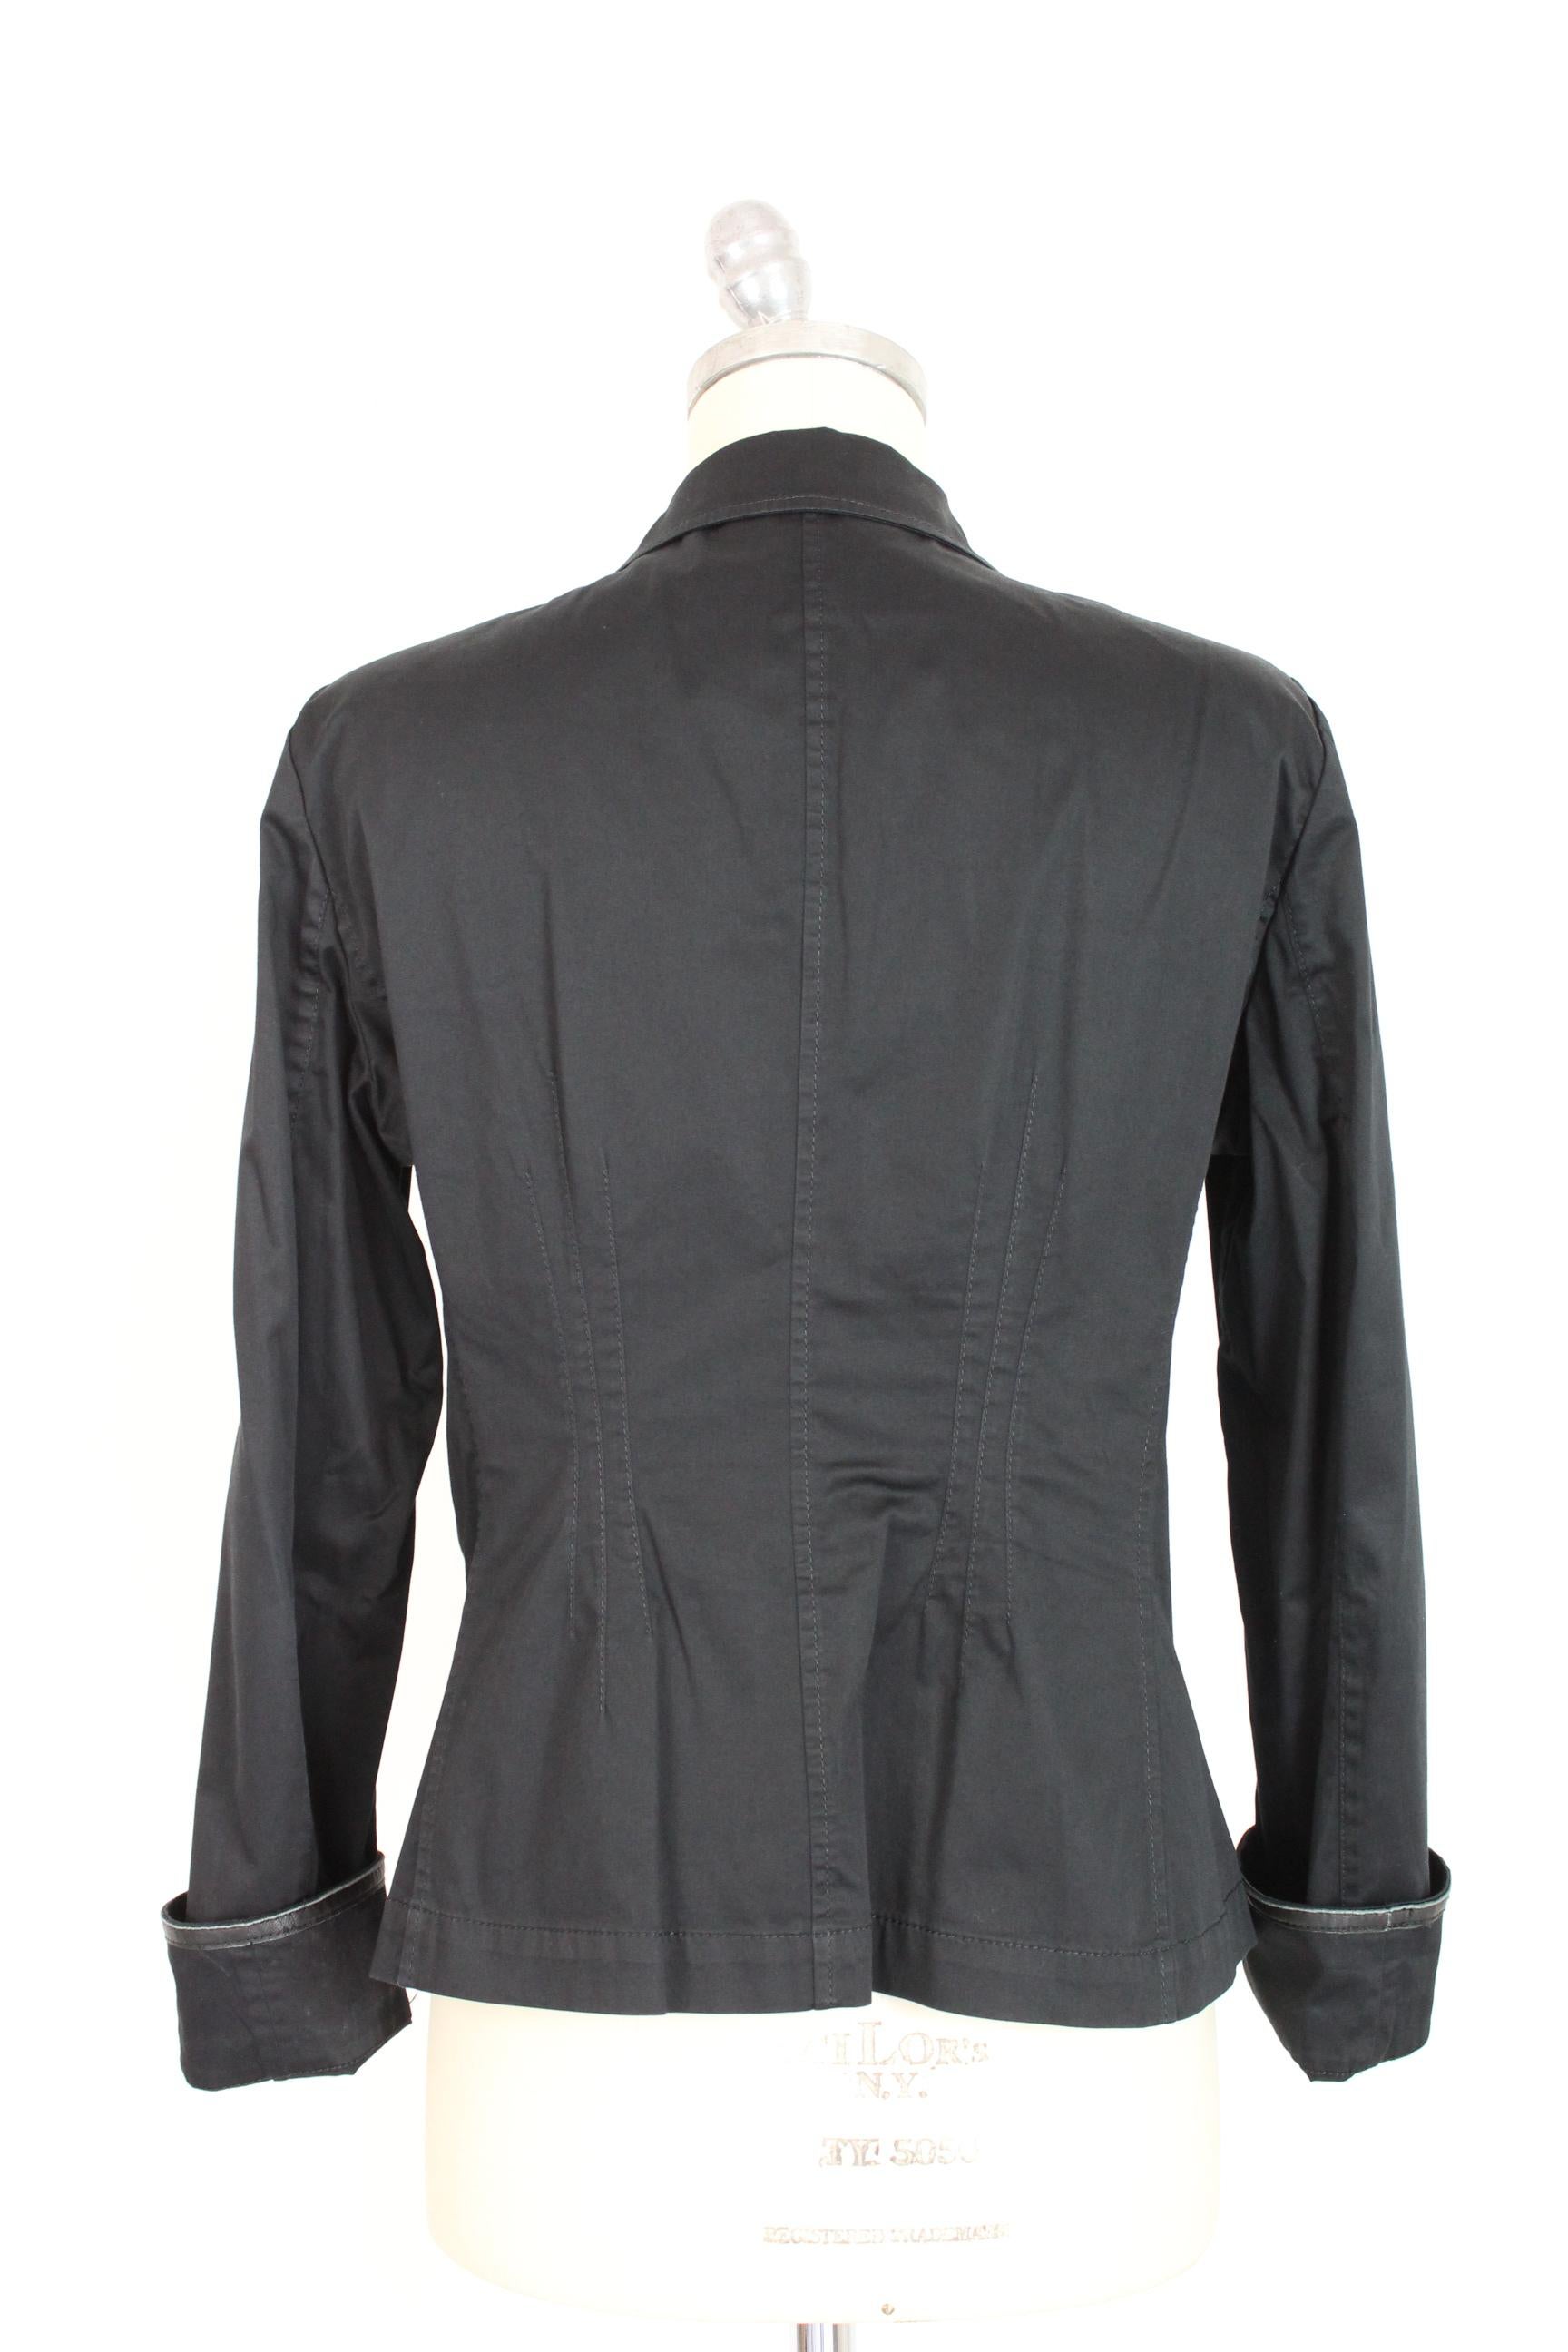 Armani Collezioni 90s vintage women's jacket. Flared jacket, black color, 96% cotton 4% elastene. Leather details on the pockets and cuffs of the sleeves. Made in Italy. Excellent vintage conditions.

Size: 46 It 12 Us 14 Uk

Shoulder: 46 cm

Bust /